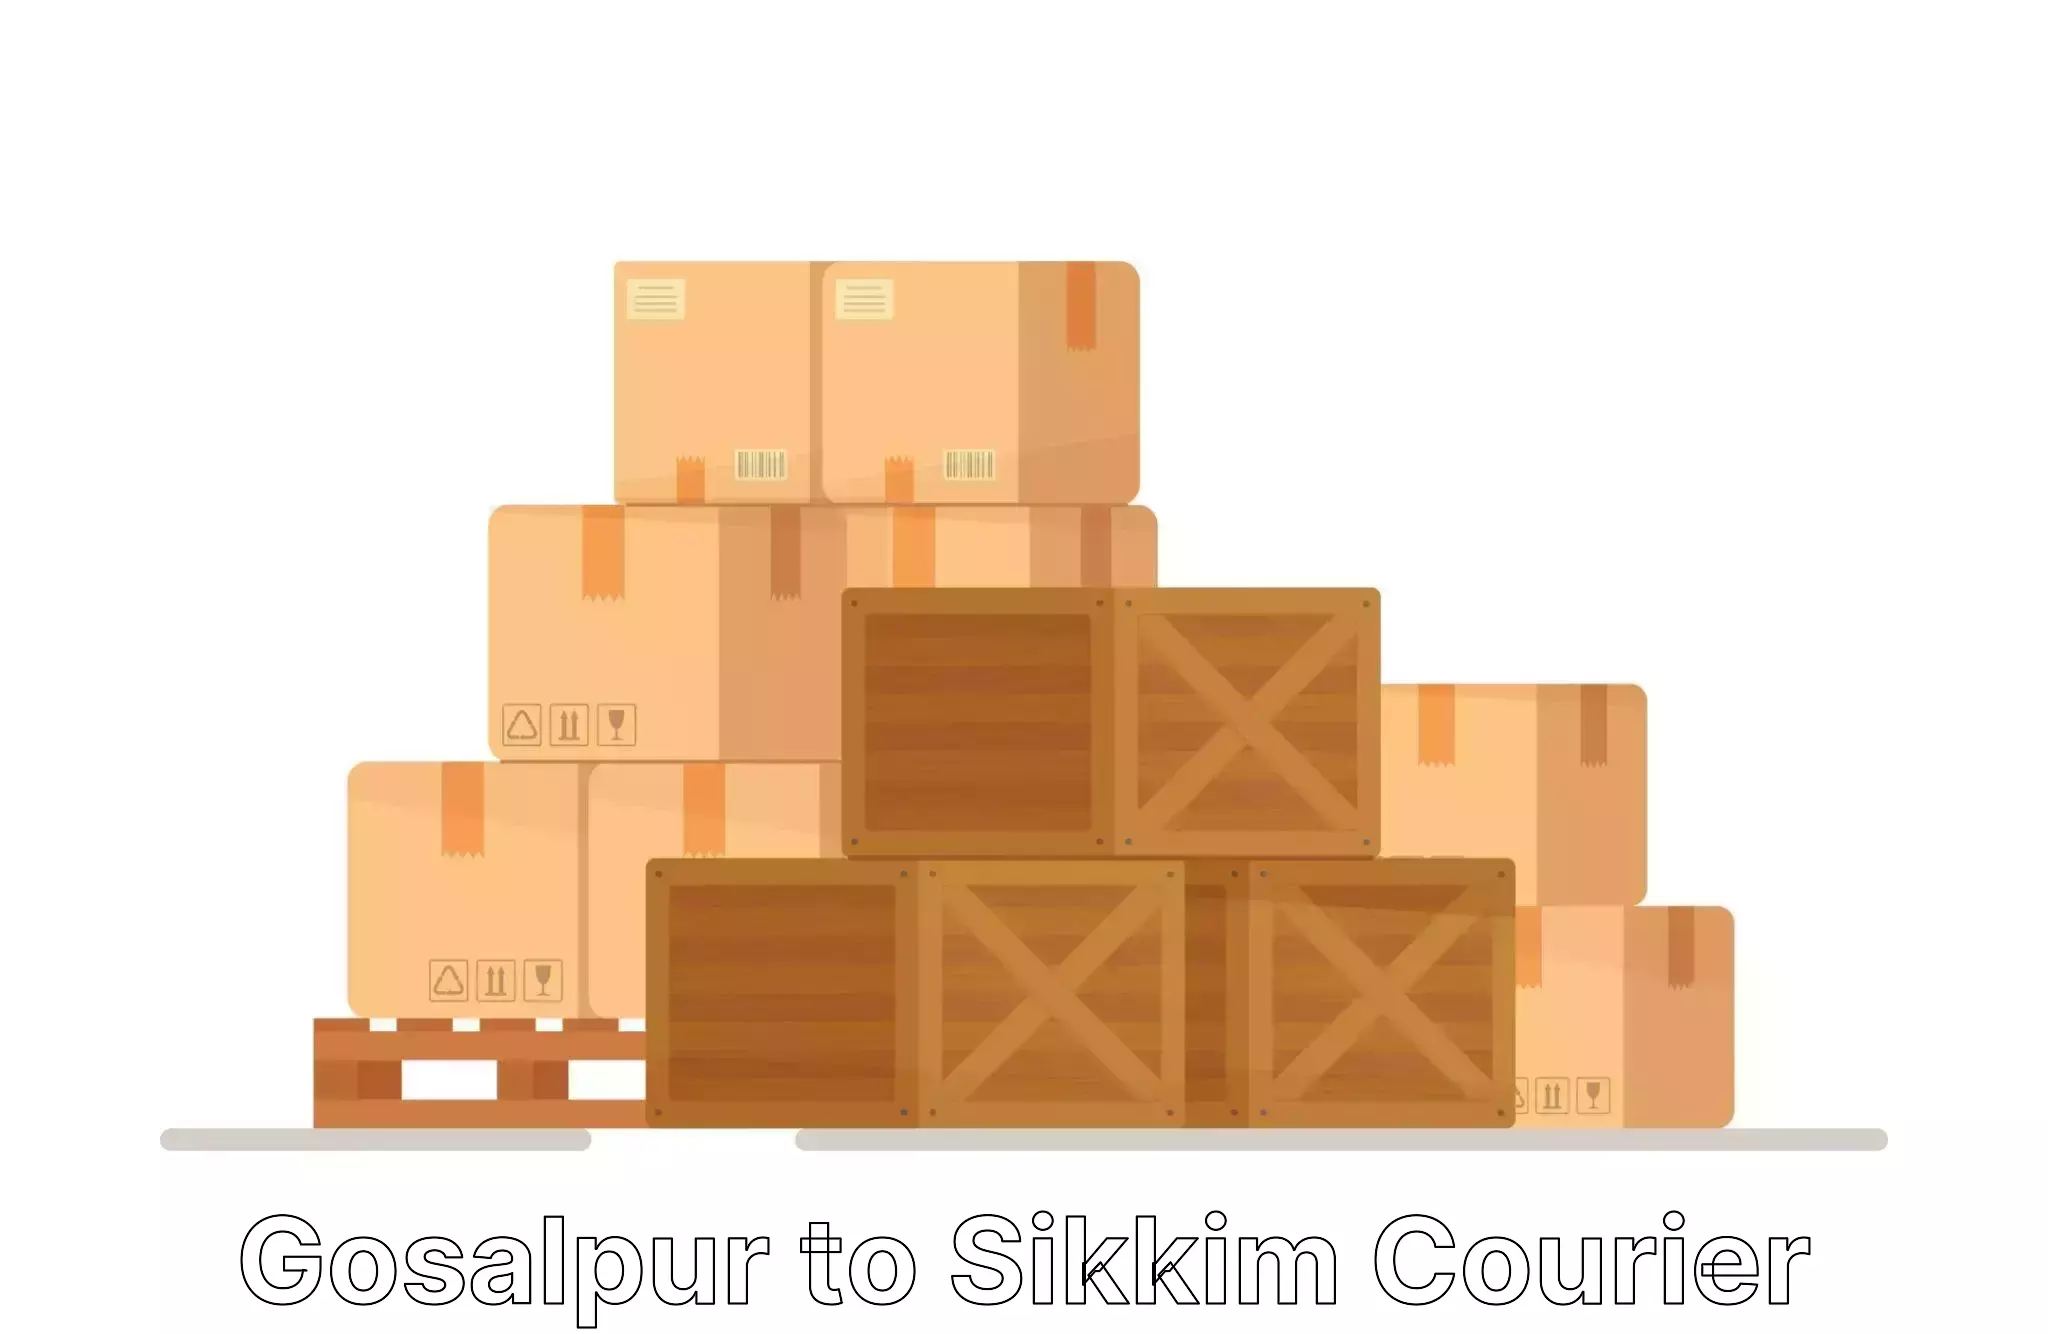 Local moving services Gosalpur to Sikkim